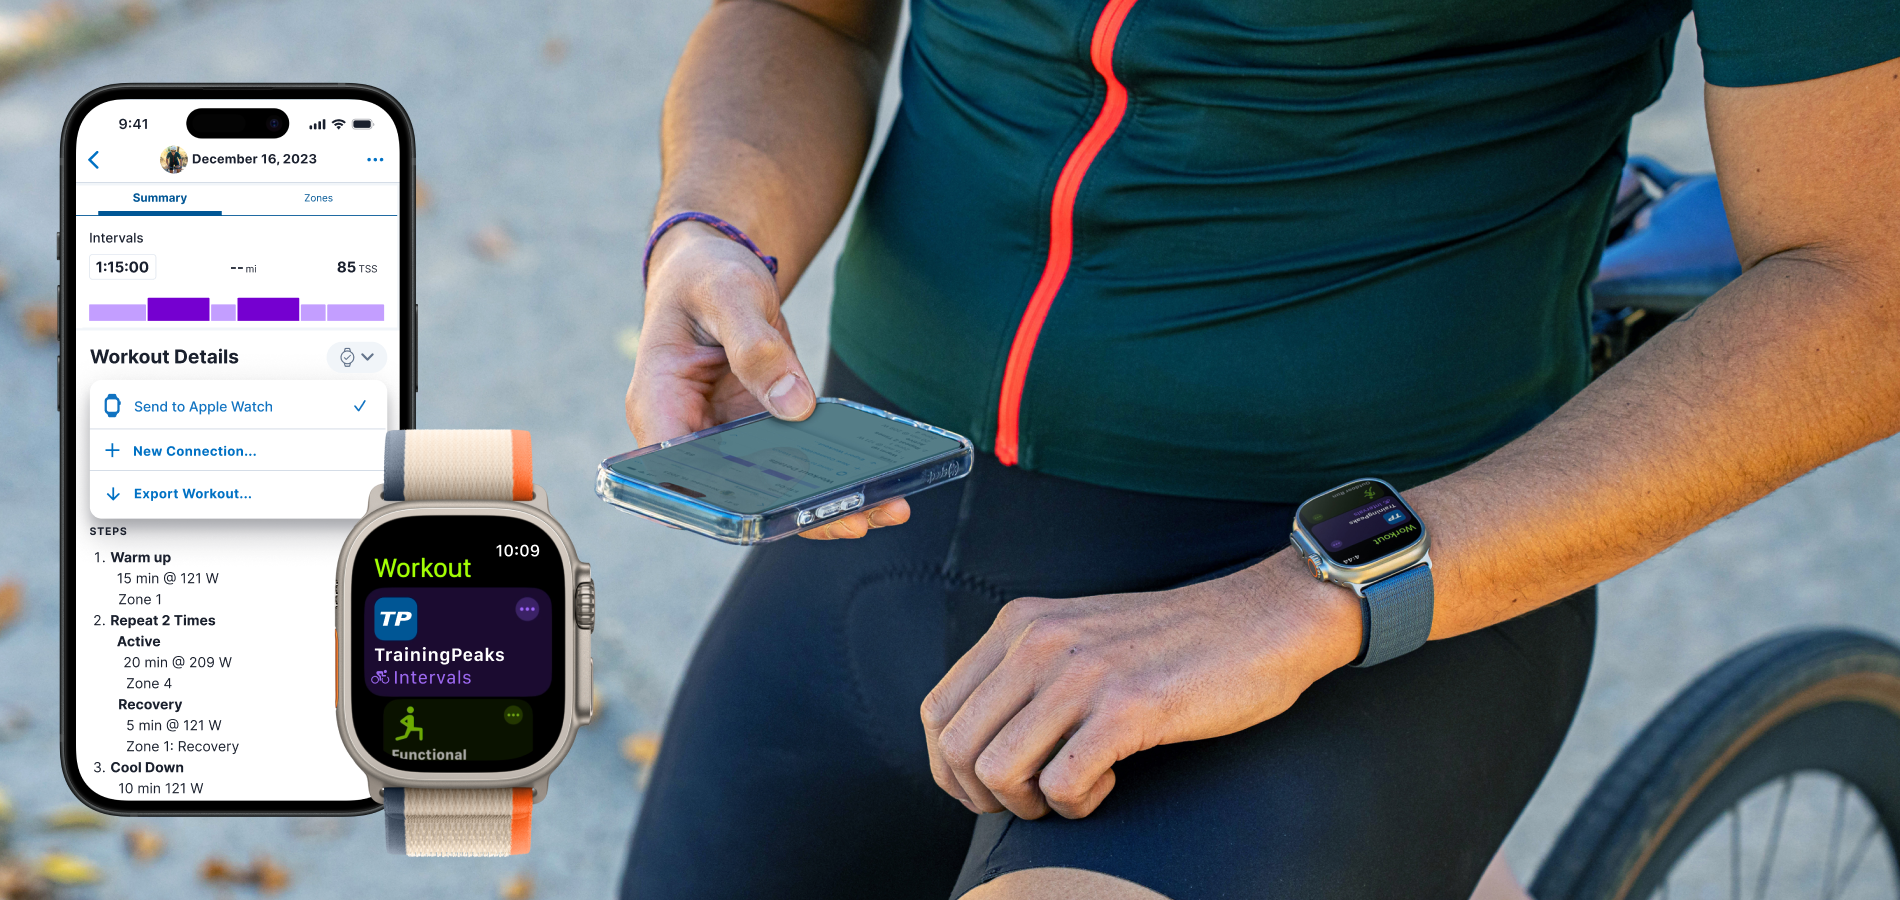 Cyclist syncs his workout from TrainingPeaks to Apple Watch and is seen sitting on his bike. TrainingPeaks workout are displayed on a watch and a phone.